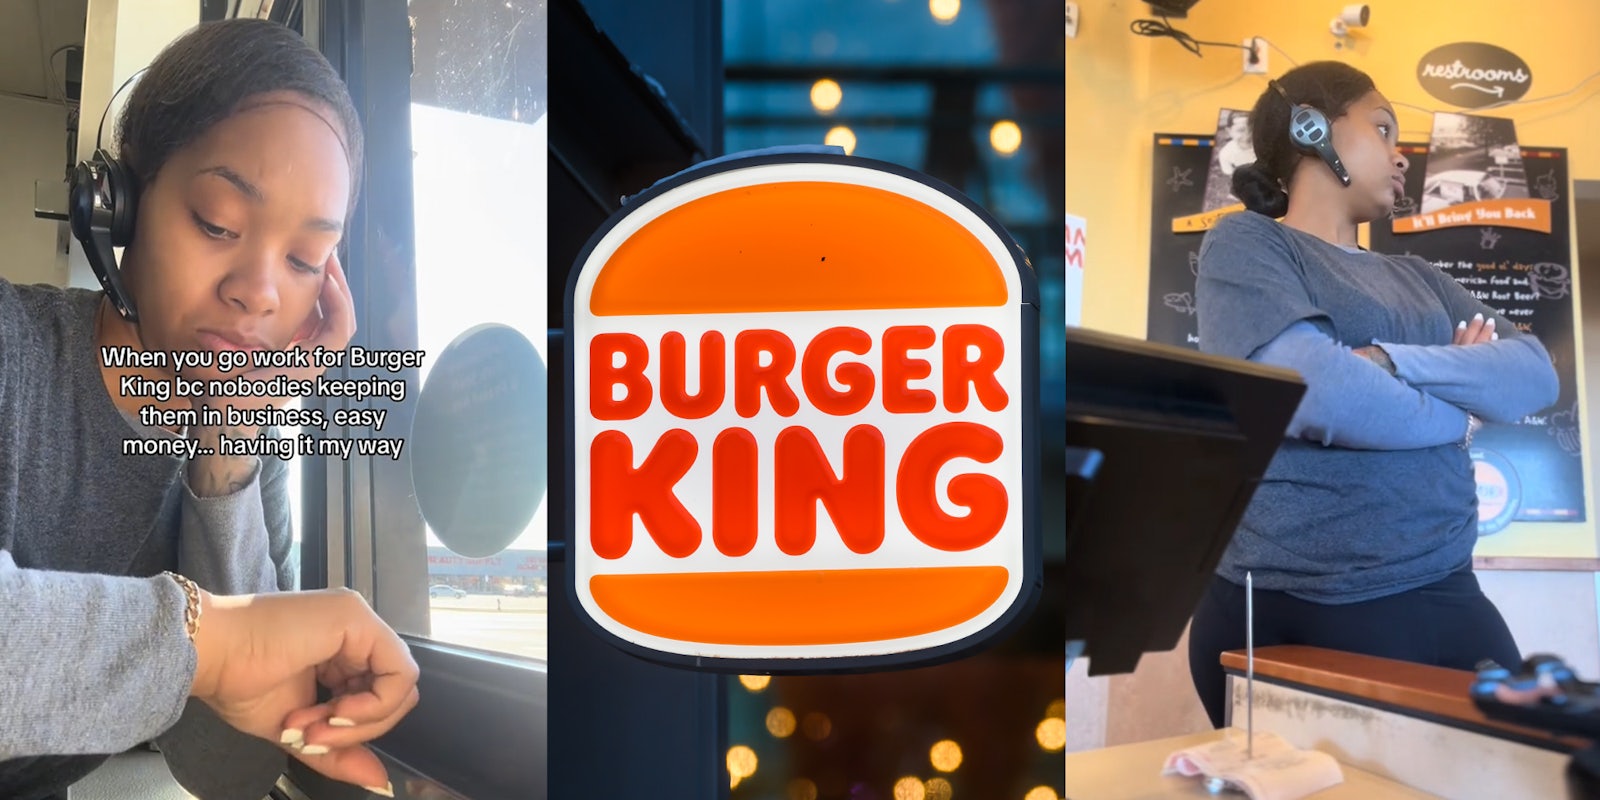 Burger King worker says her job is 'easy money' because no customers come in